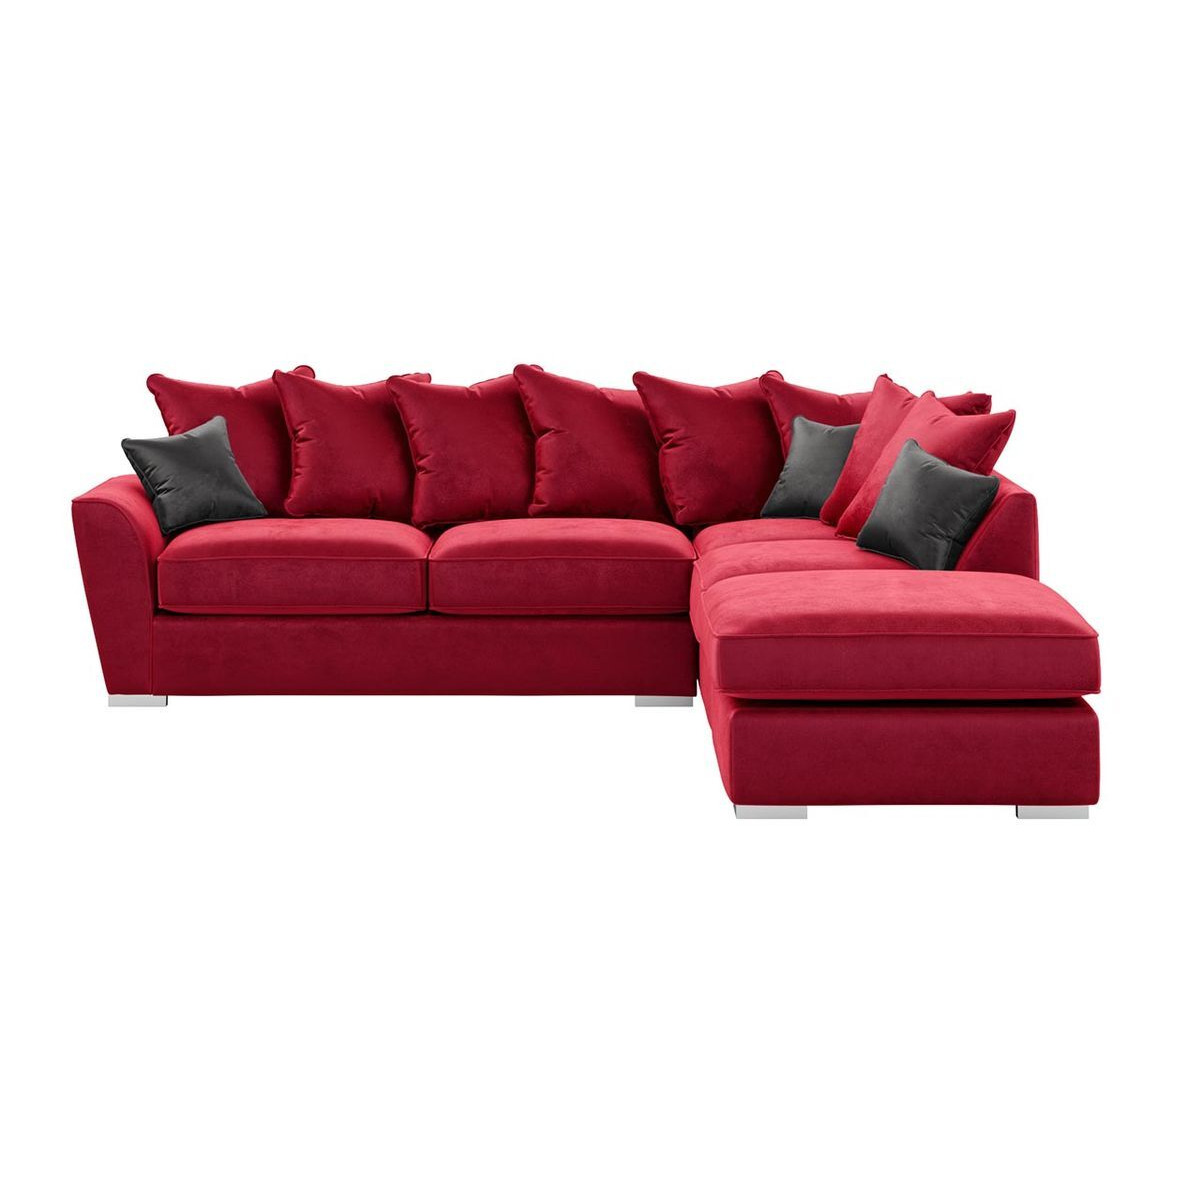 Majestic Right Hand Corner Sofa with Footstool and Loose Back Cushions, dark red/graphite - image 1